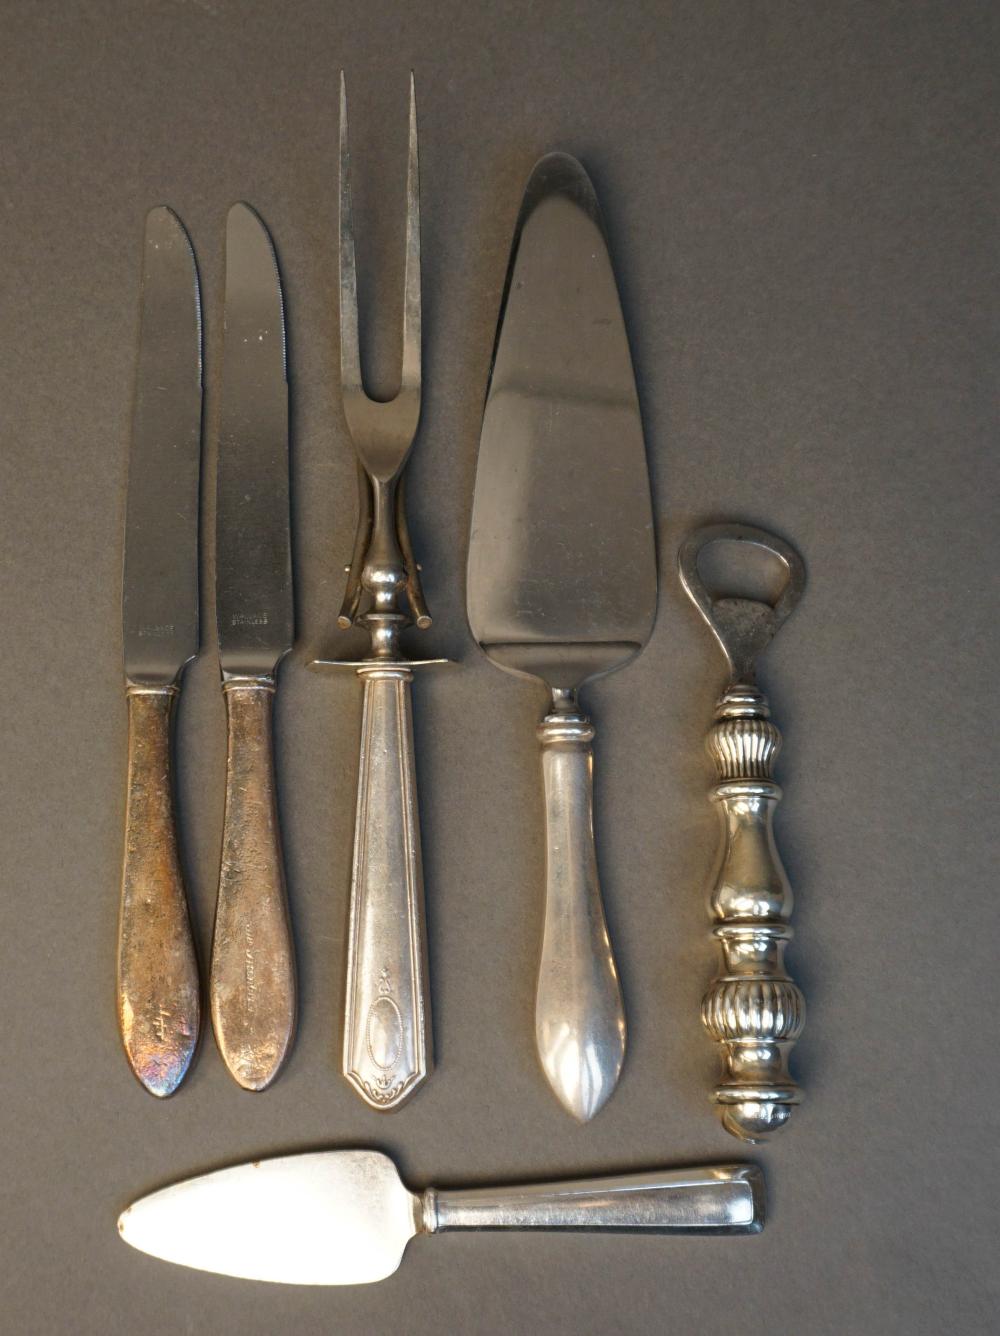 SIX STERLING SILVER HANDLE SERVING